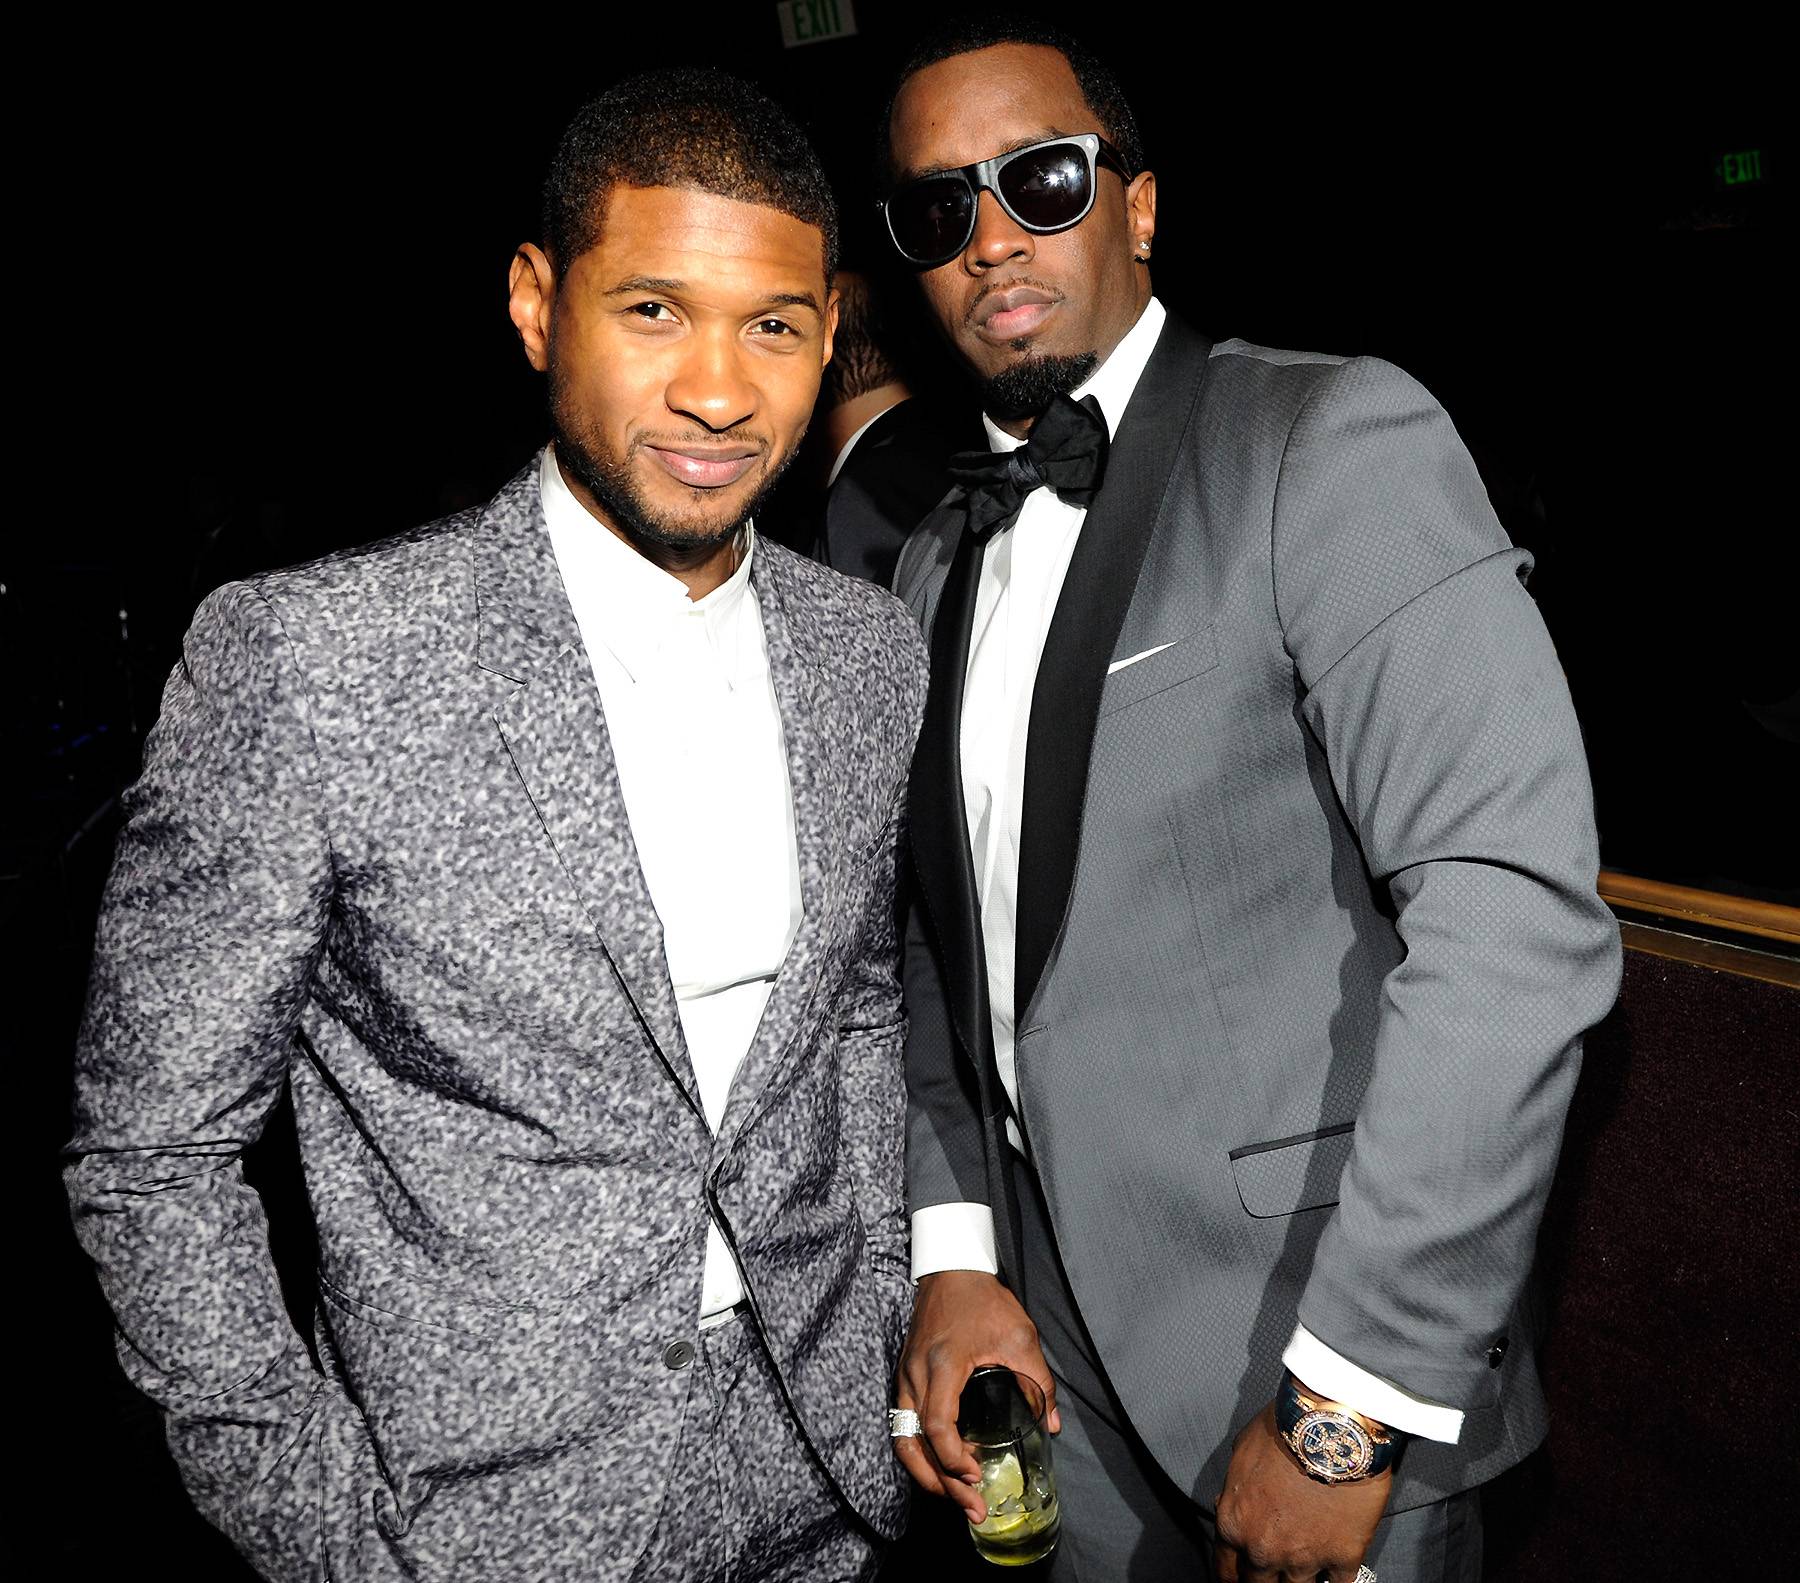 See Diddy And Usher Take Lounge Wear To A Whole 'Nother Level For The  'Gram' | News | BET